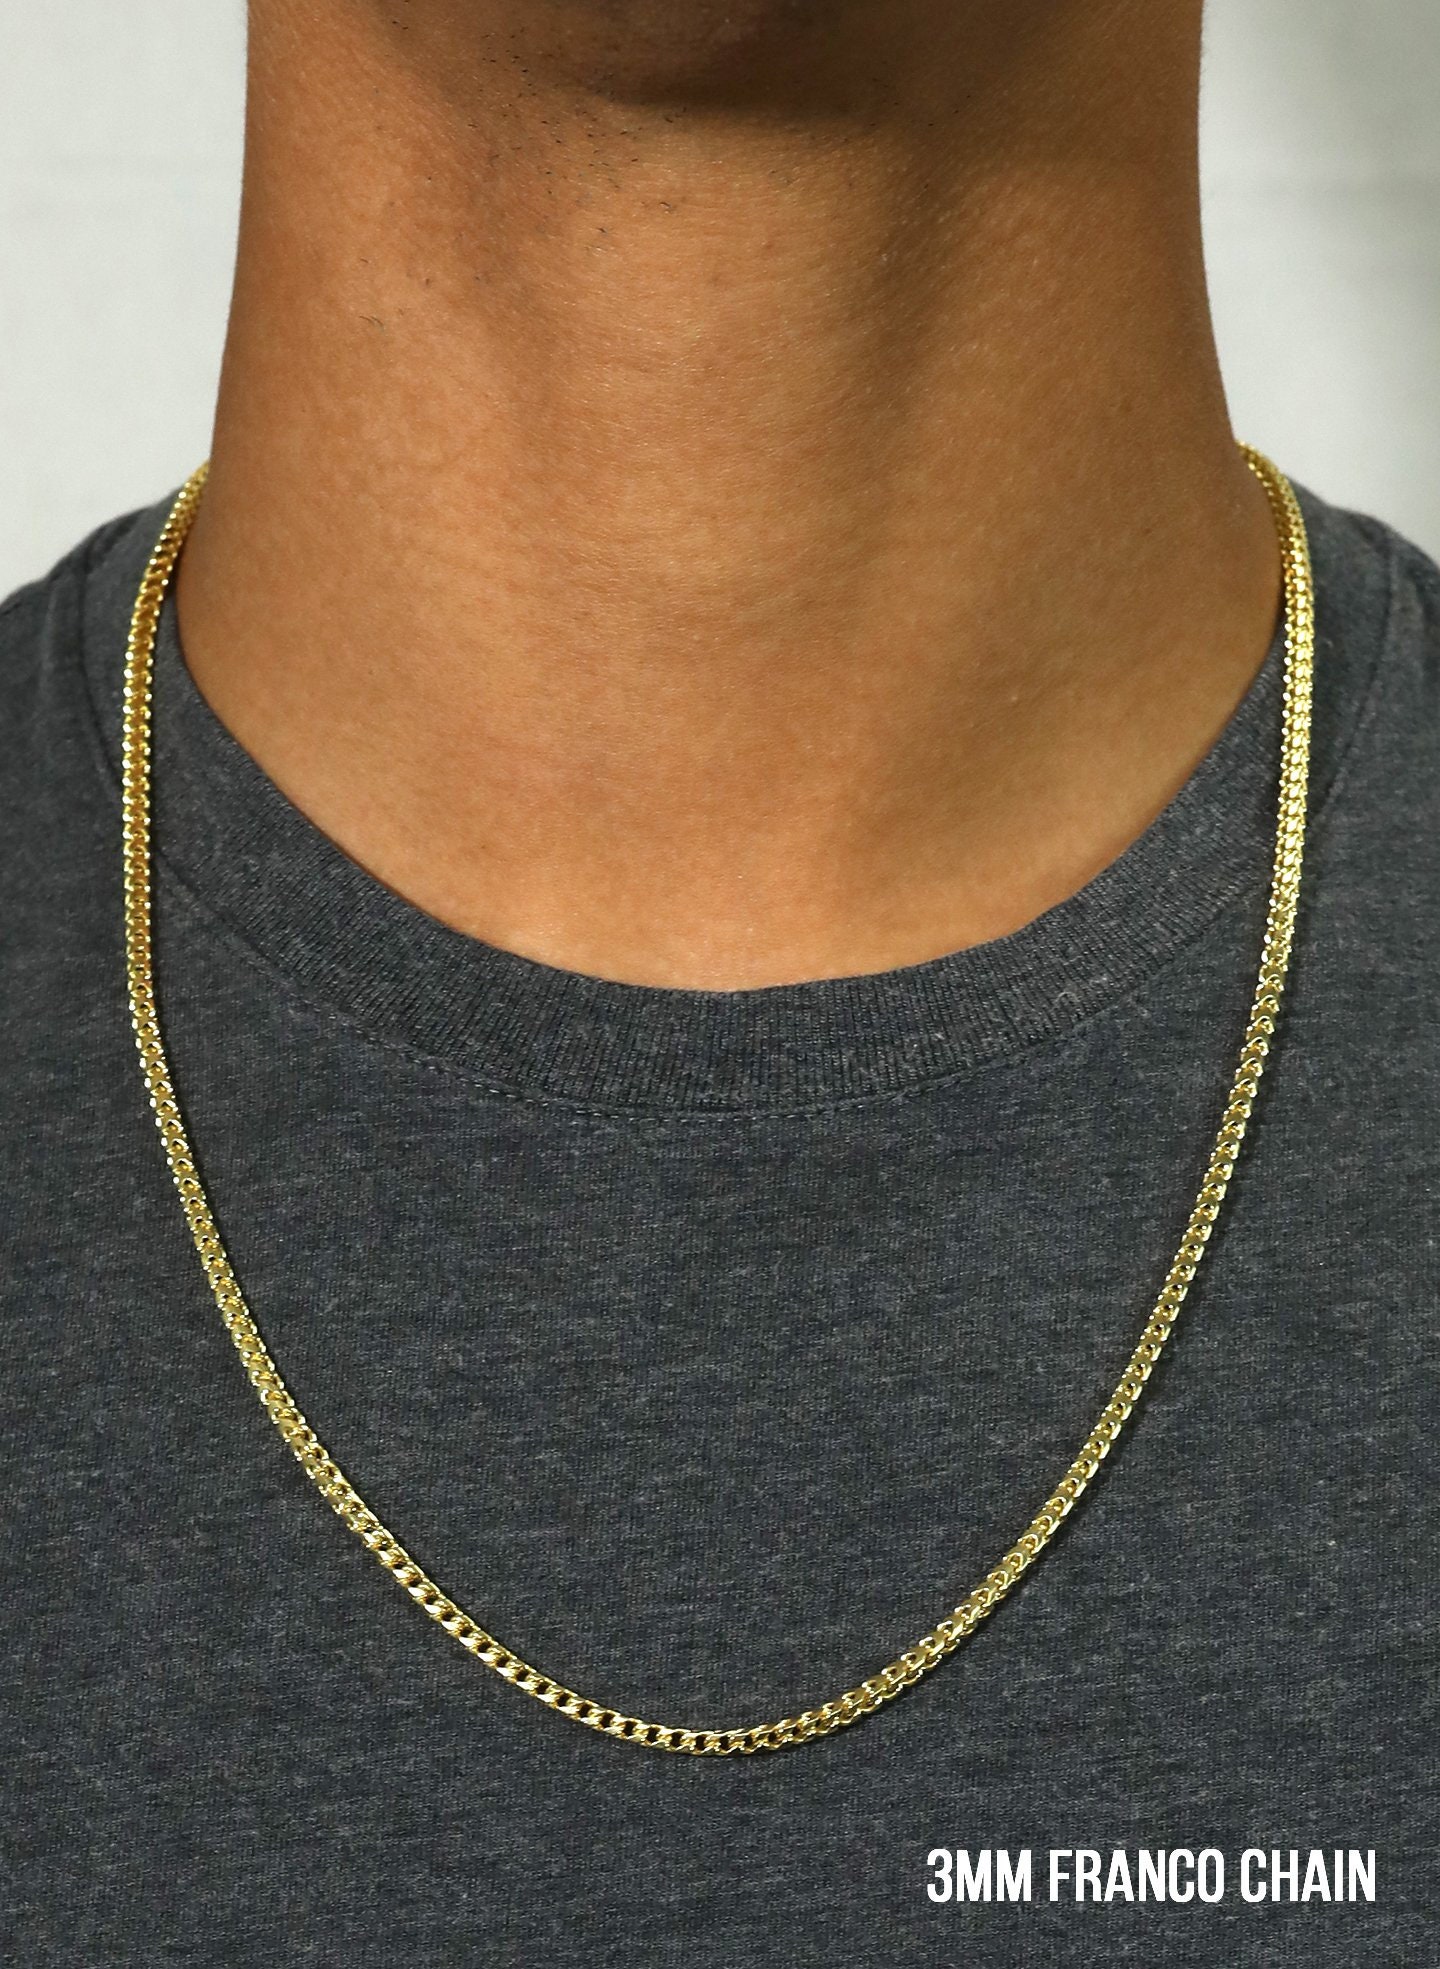 14k Solid White Gold Franco Chain Necklace Diamond Cut - Etsy